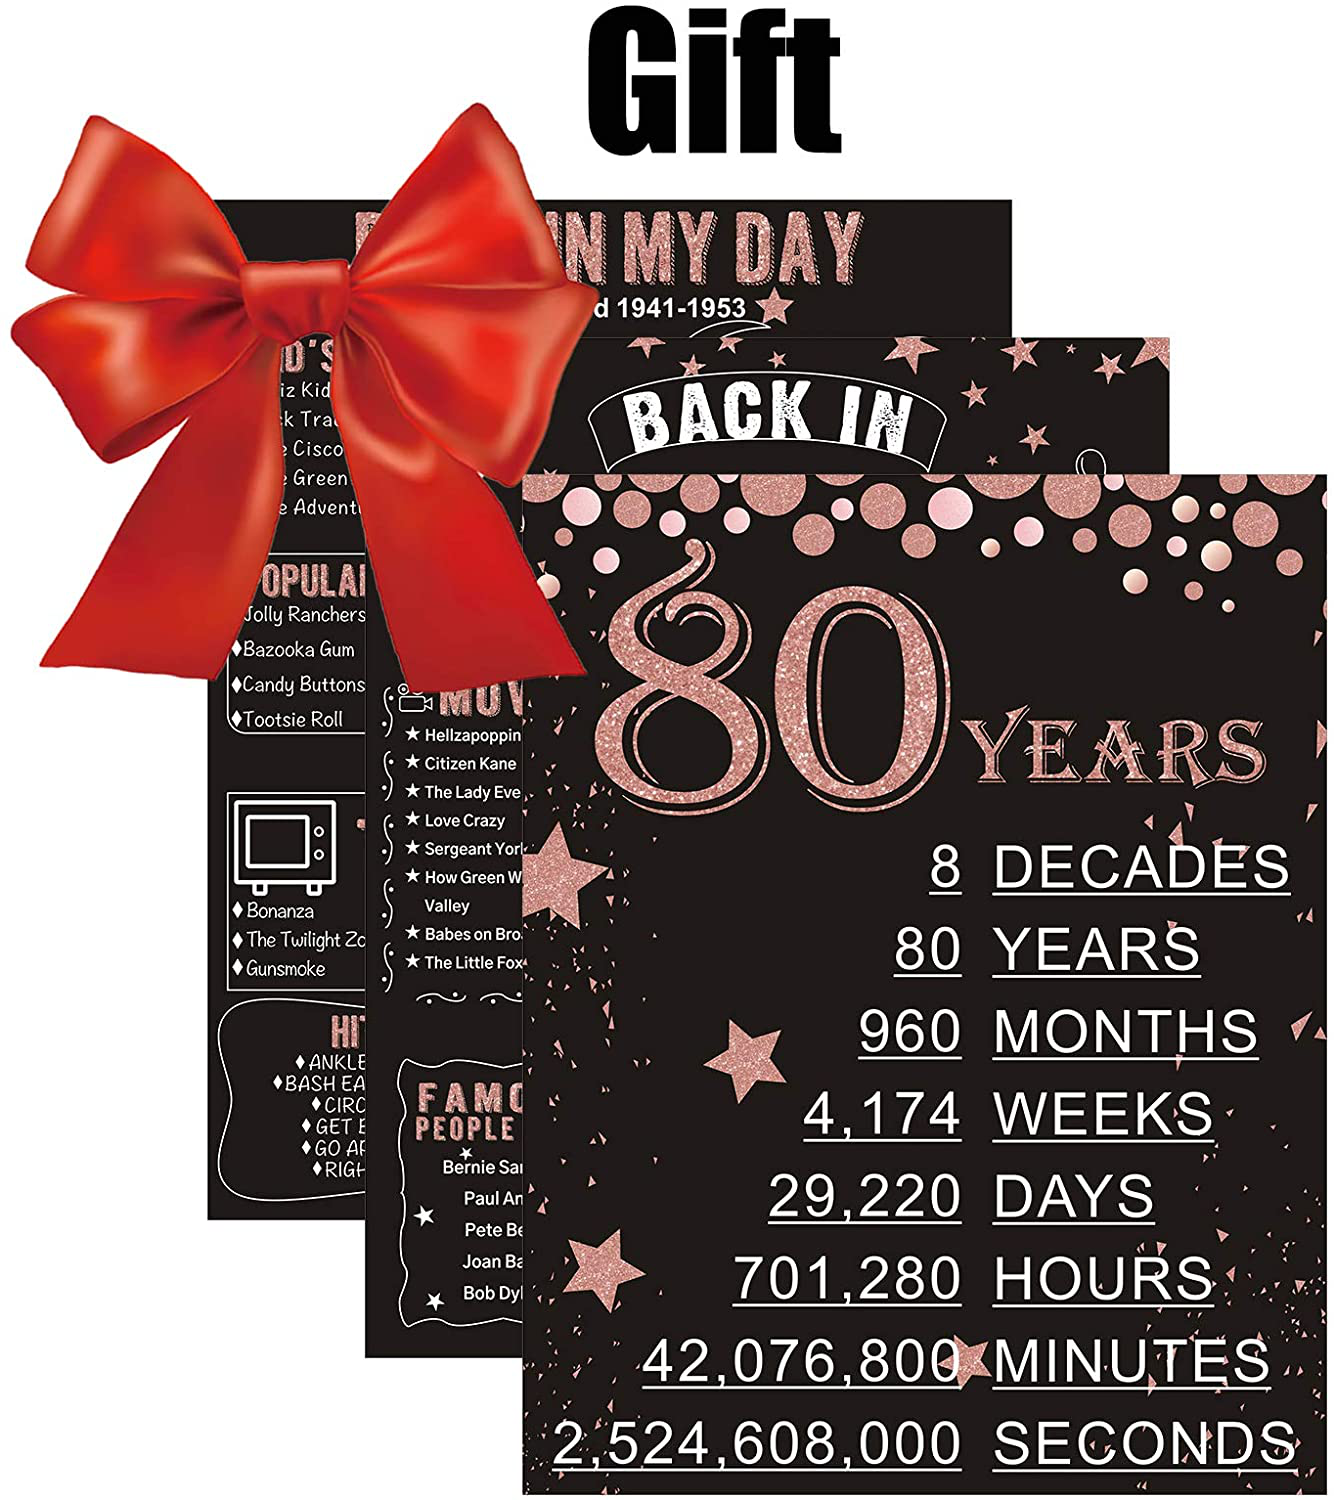 Homanga 80th Birthday Decorations for Women or Men, Rose Gold 3 Pieces 11”x 14” Back In 1941 Poster, 80 Years Party Wedding Anniversary Decoration Supplies, 80th Gifts for Women Her